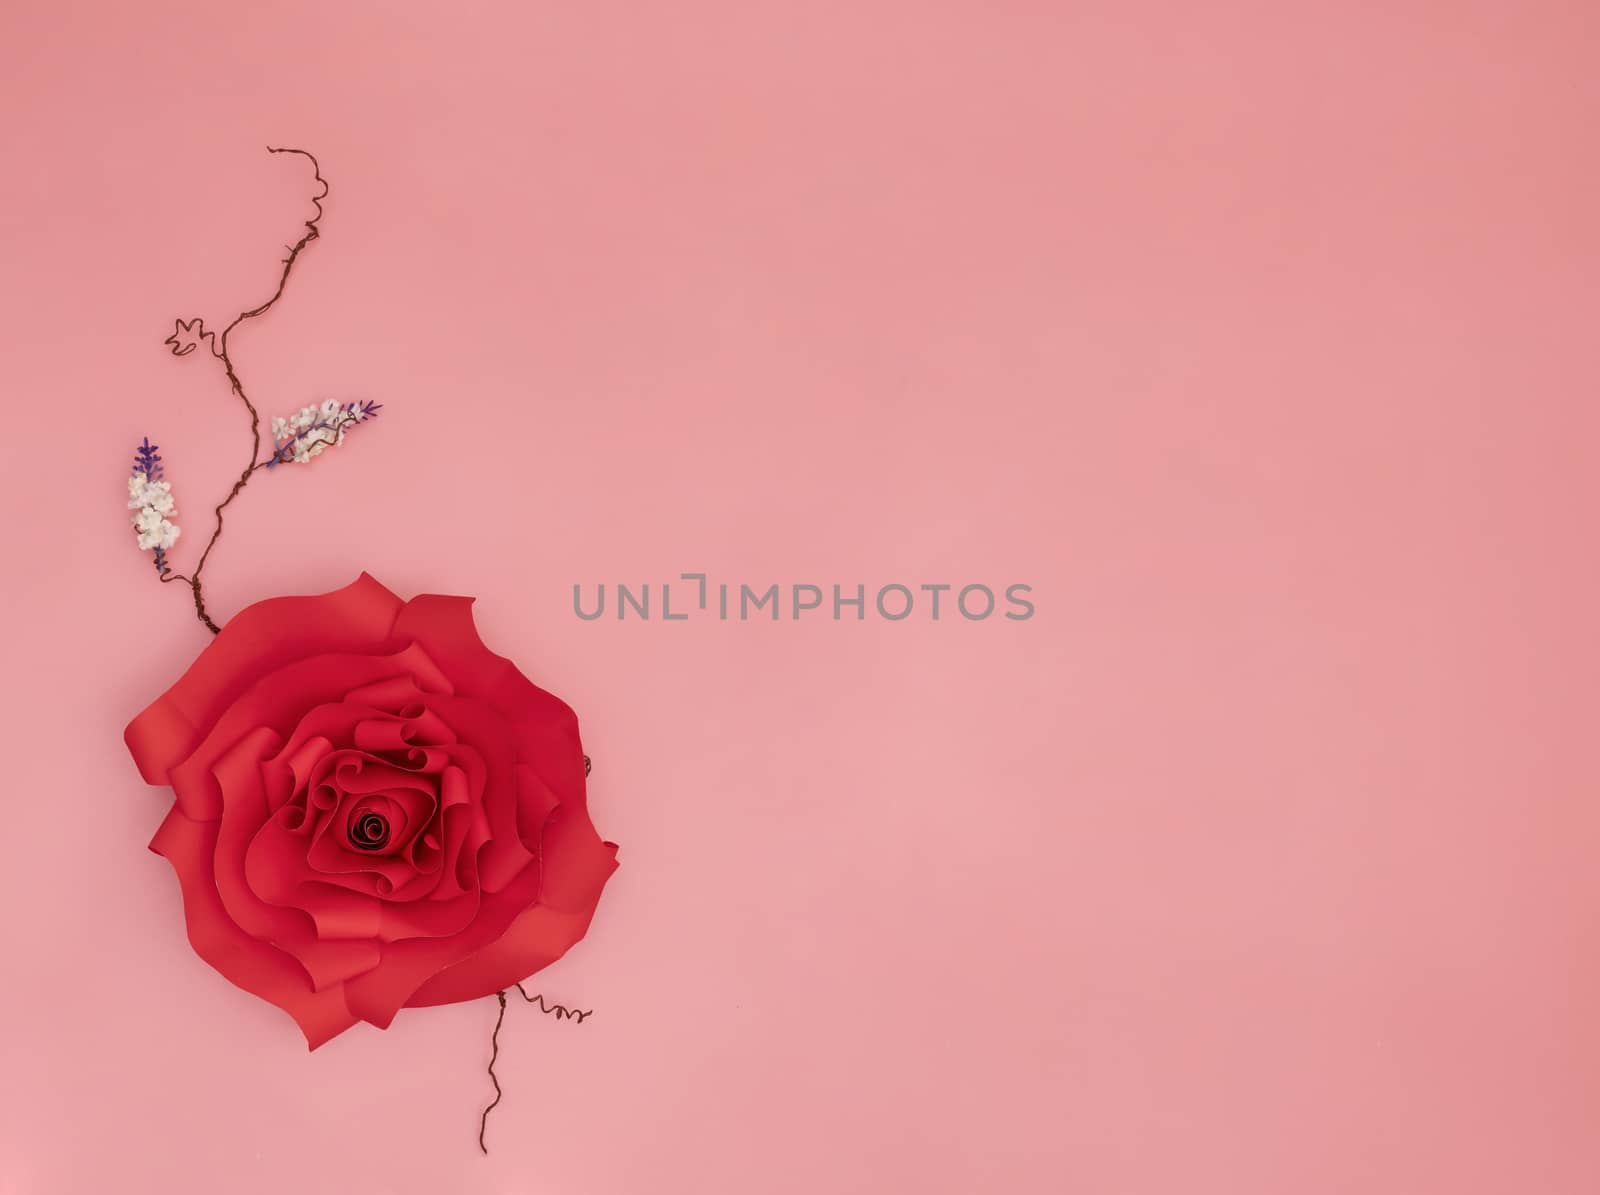 A red paper rose and tiny white flowers with dried veins on salmon pink background.